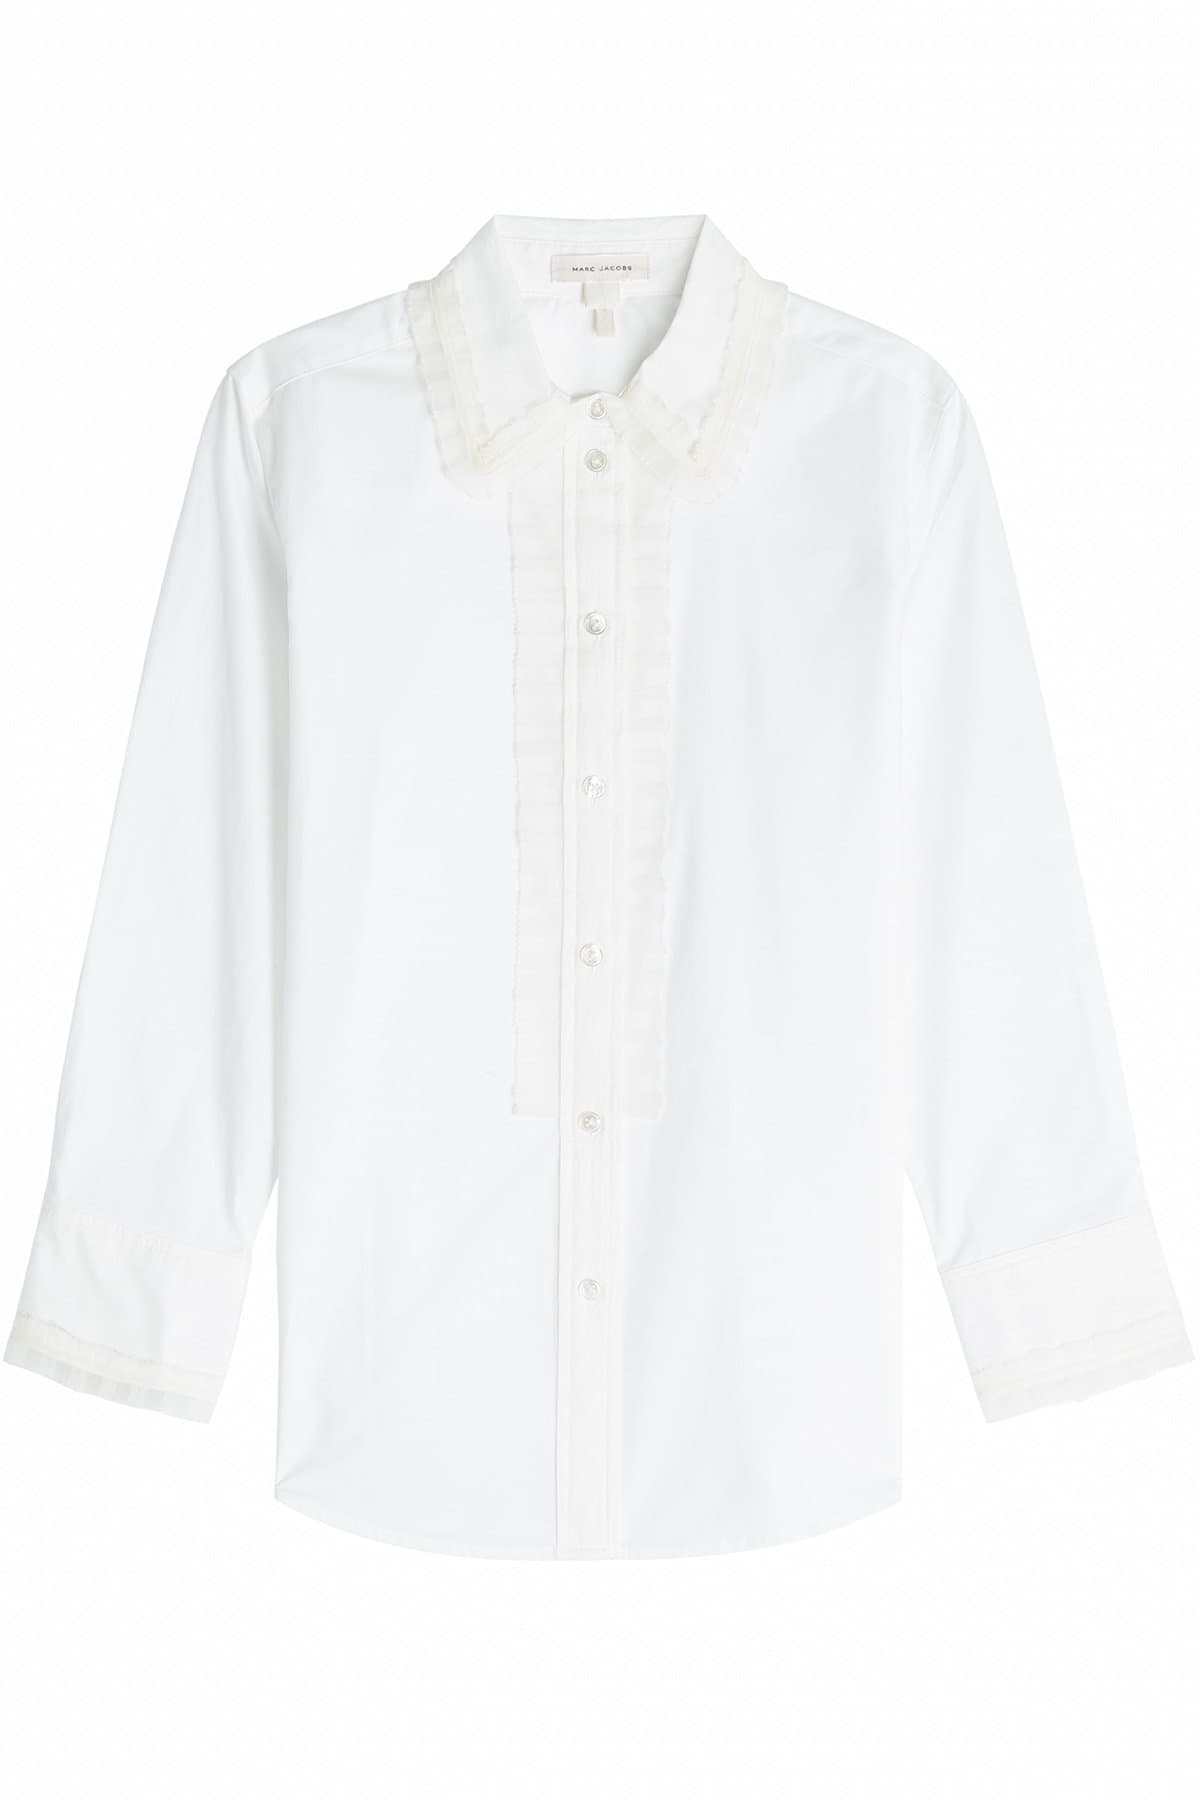 Cotton Shirt with Chiffon Trim by Marc Jacobs